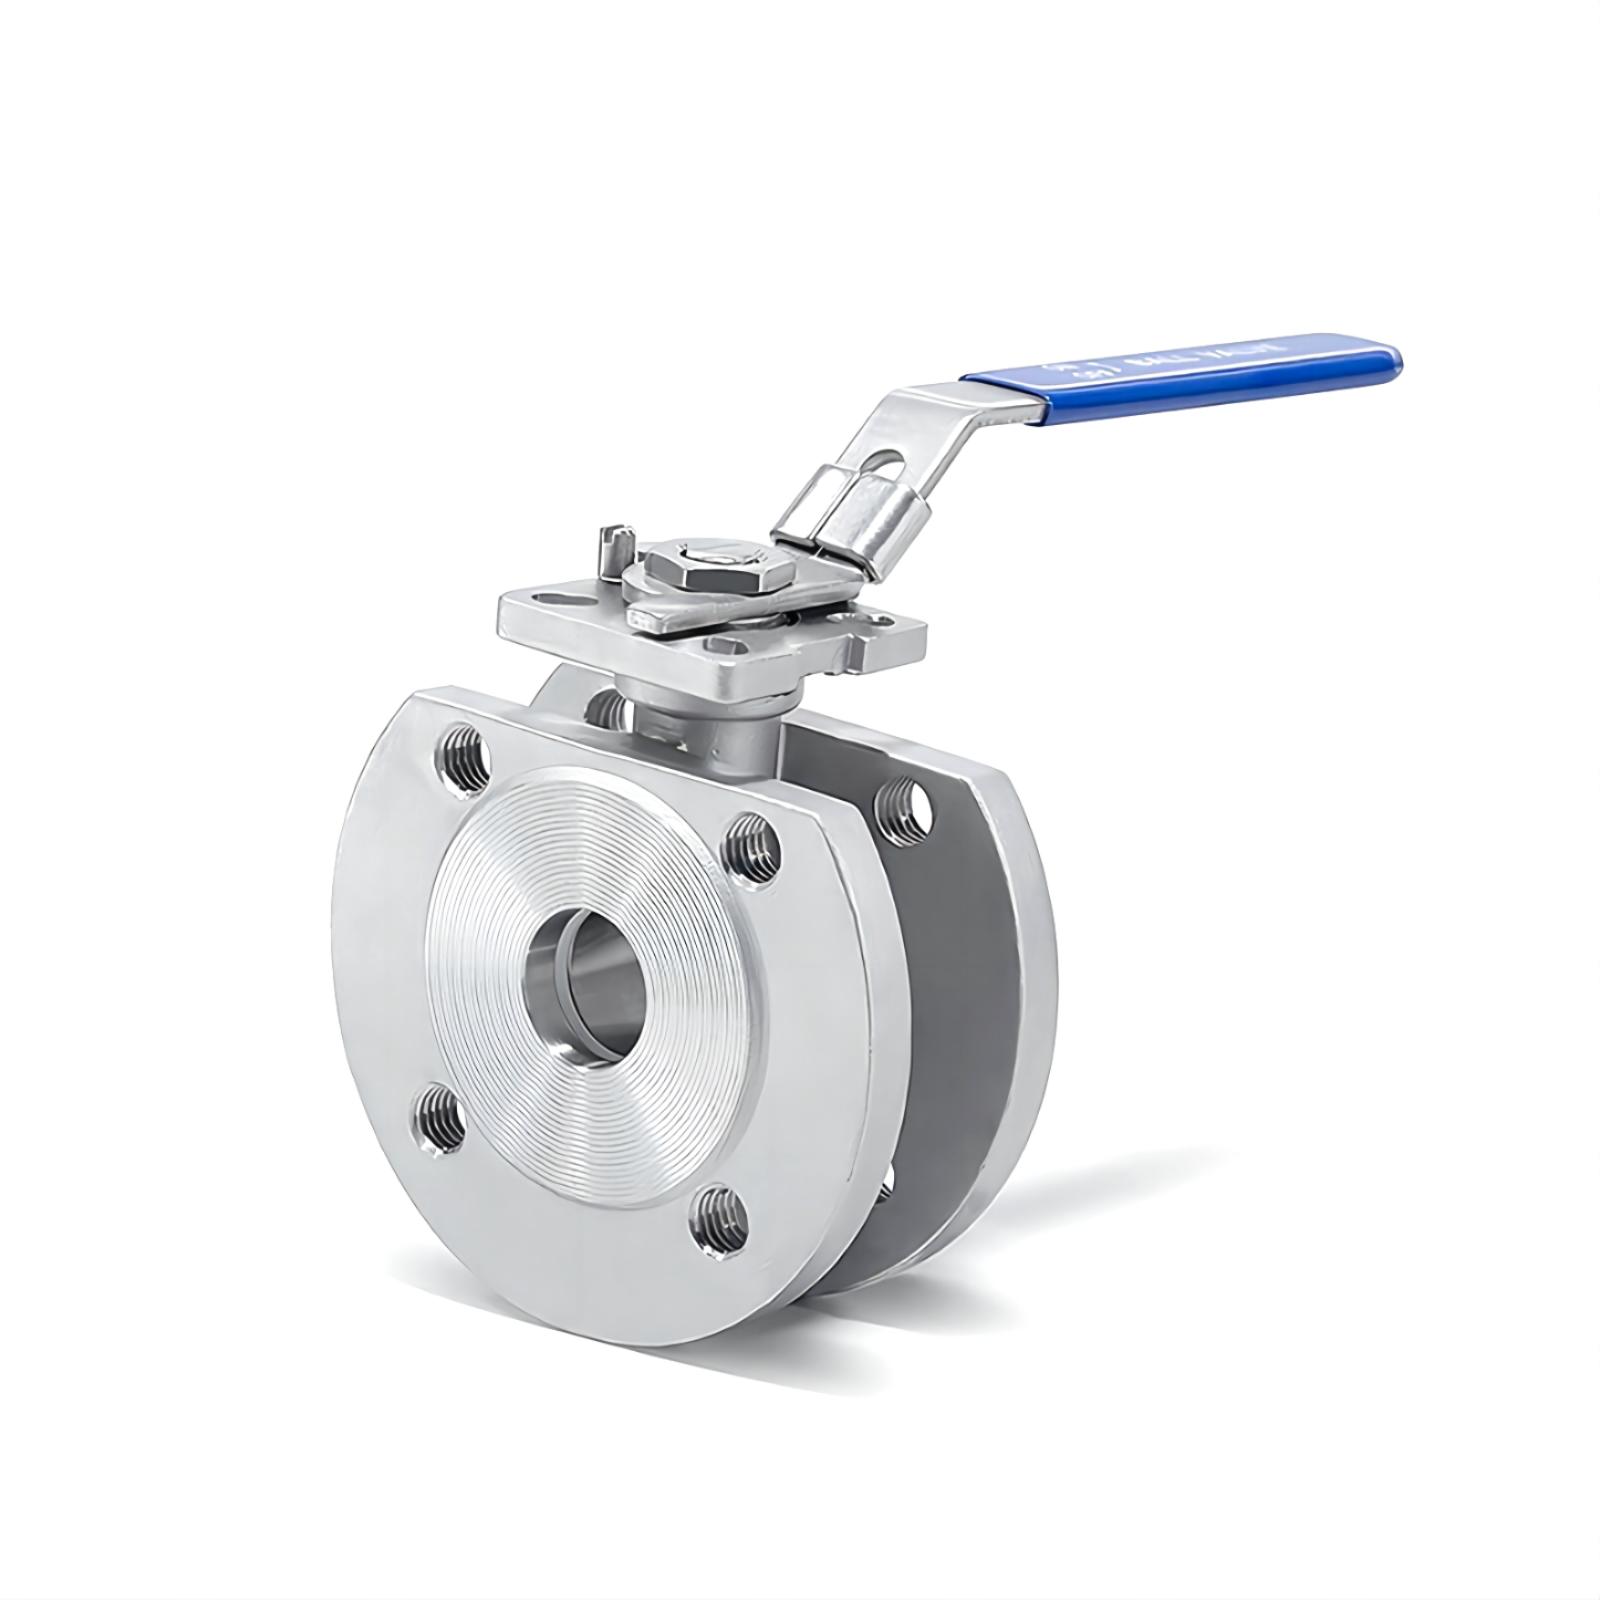 Stainless steel wafer type flanged ultra thin Italian ball valve 